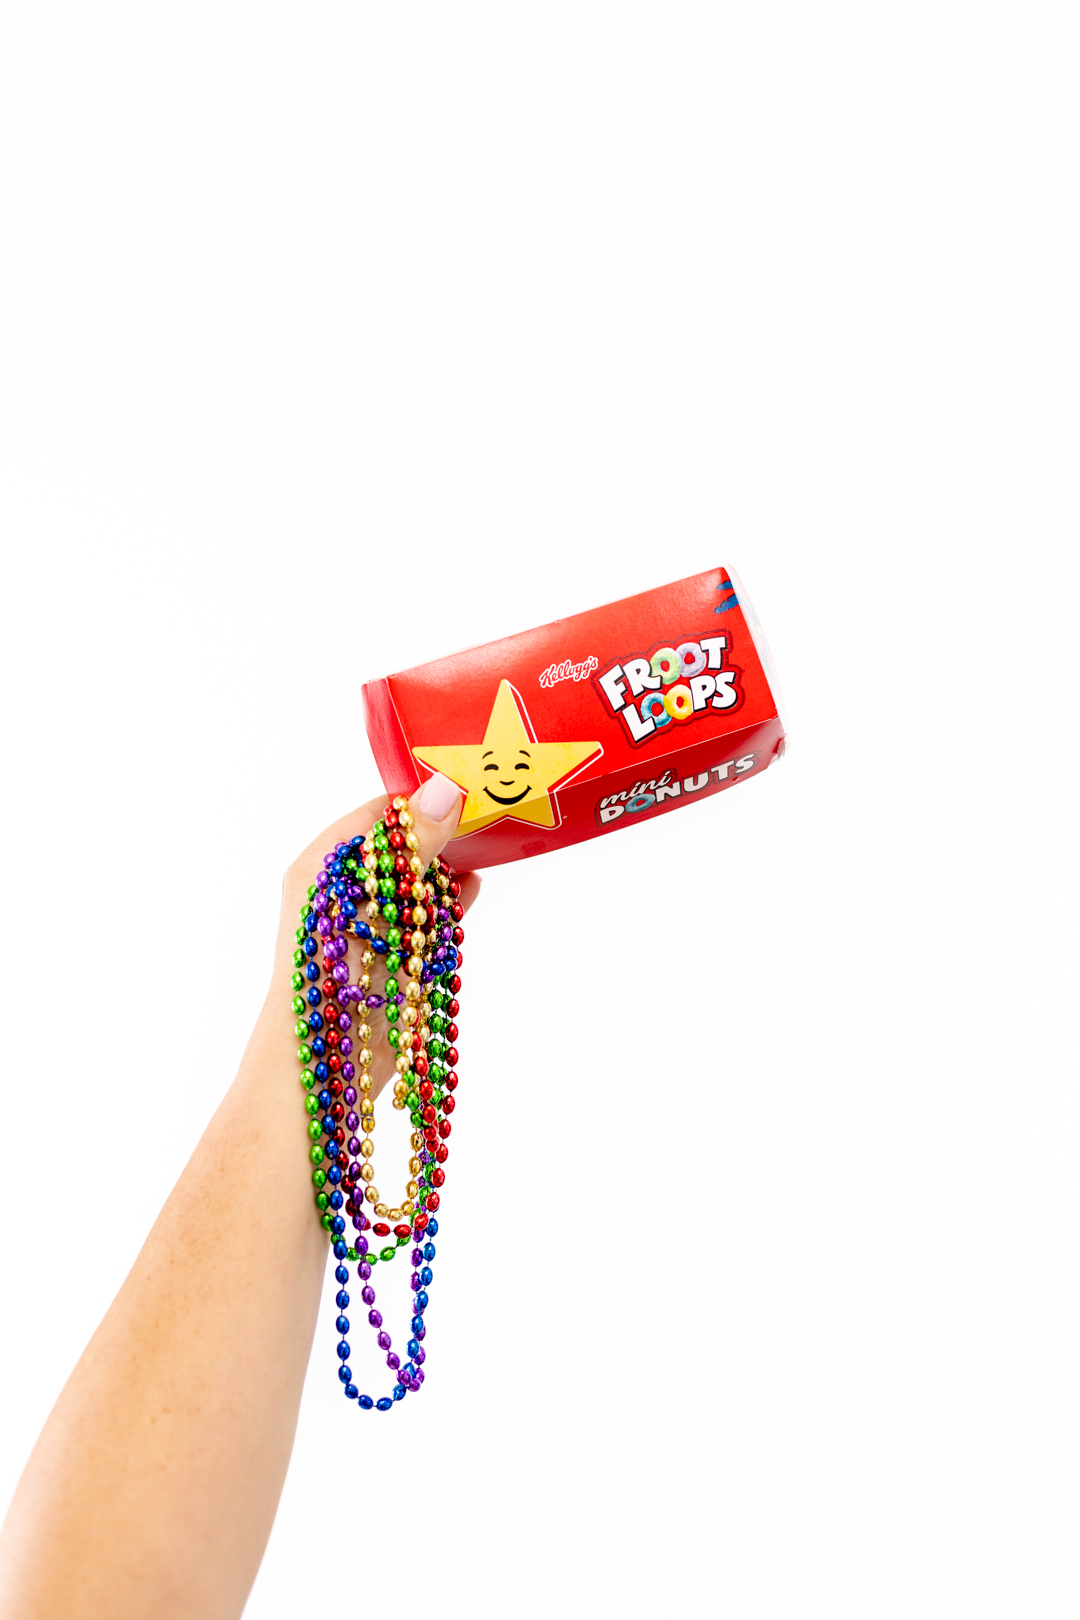 Kellogg's Mini Donuts and rainbow colored bead necklaces